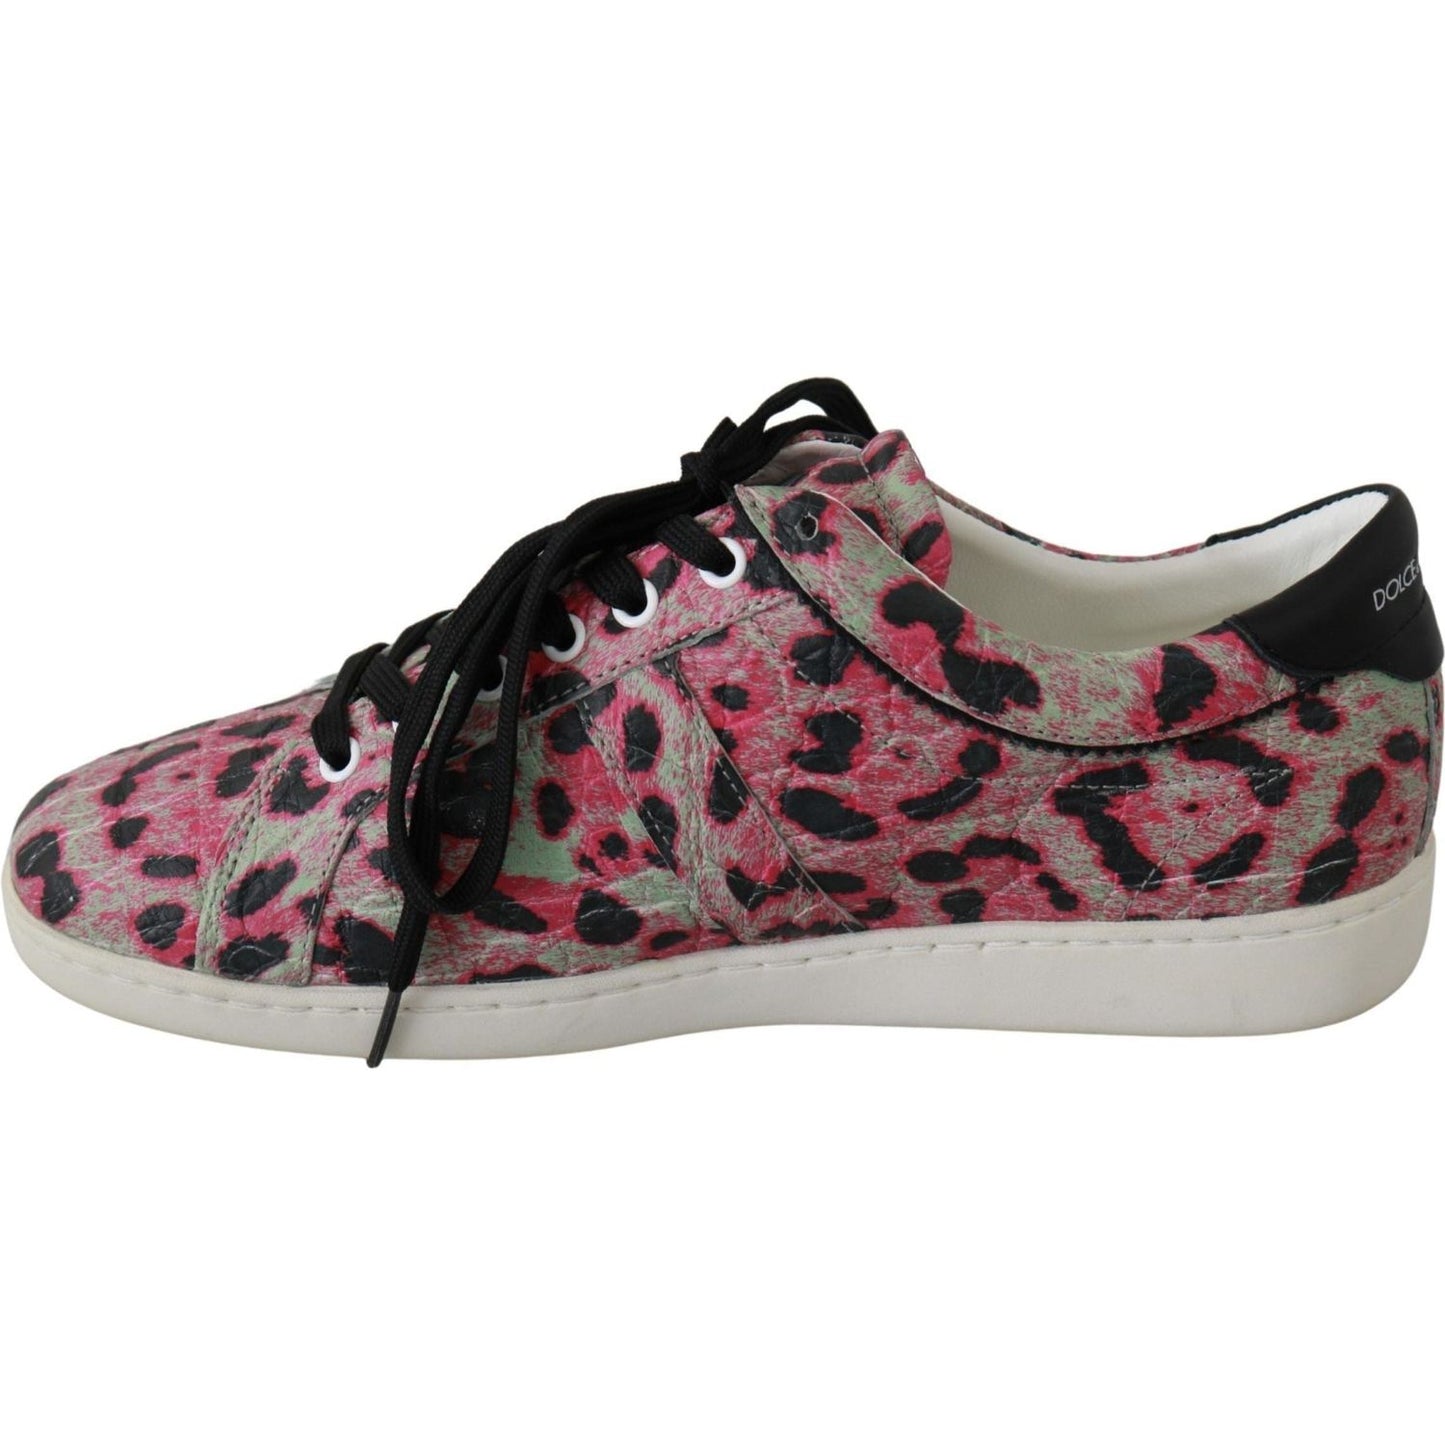 Dolce & Gabbana Multicolor Crocodile Leather Sneakers pink-leopard-print-training-leather-flat-sneakers